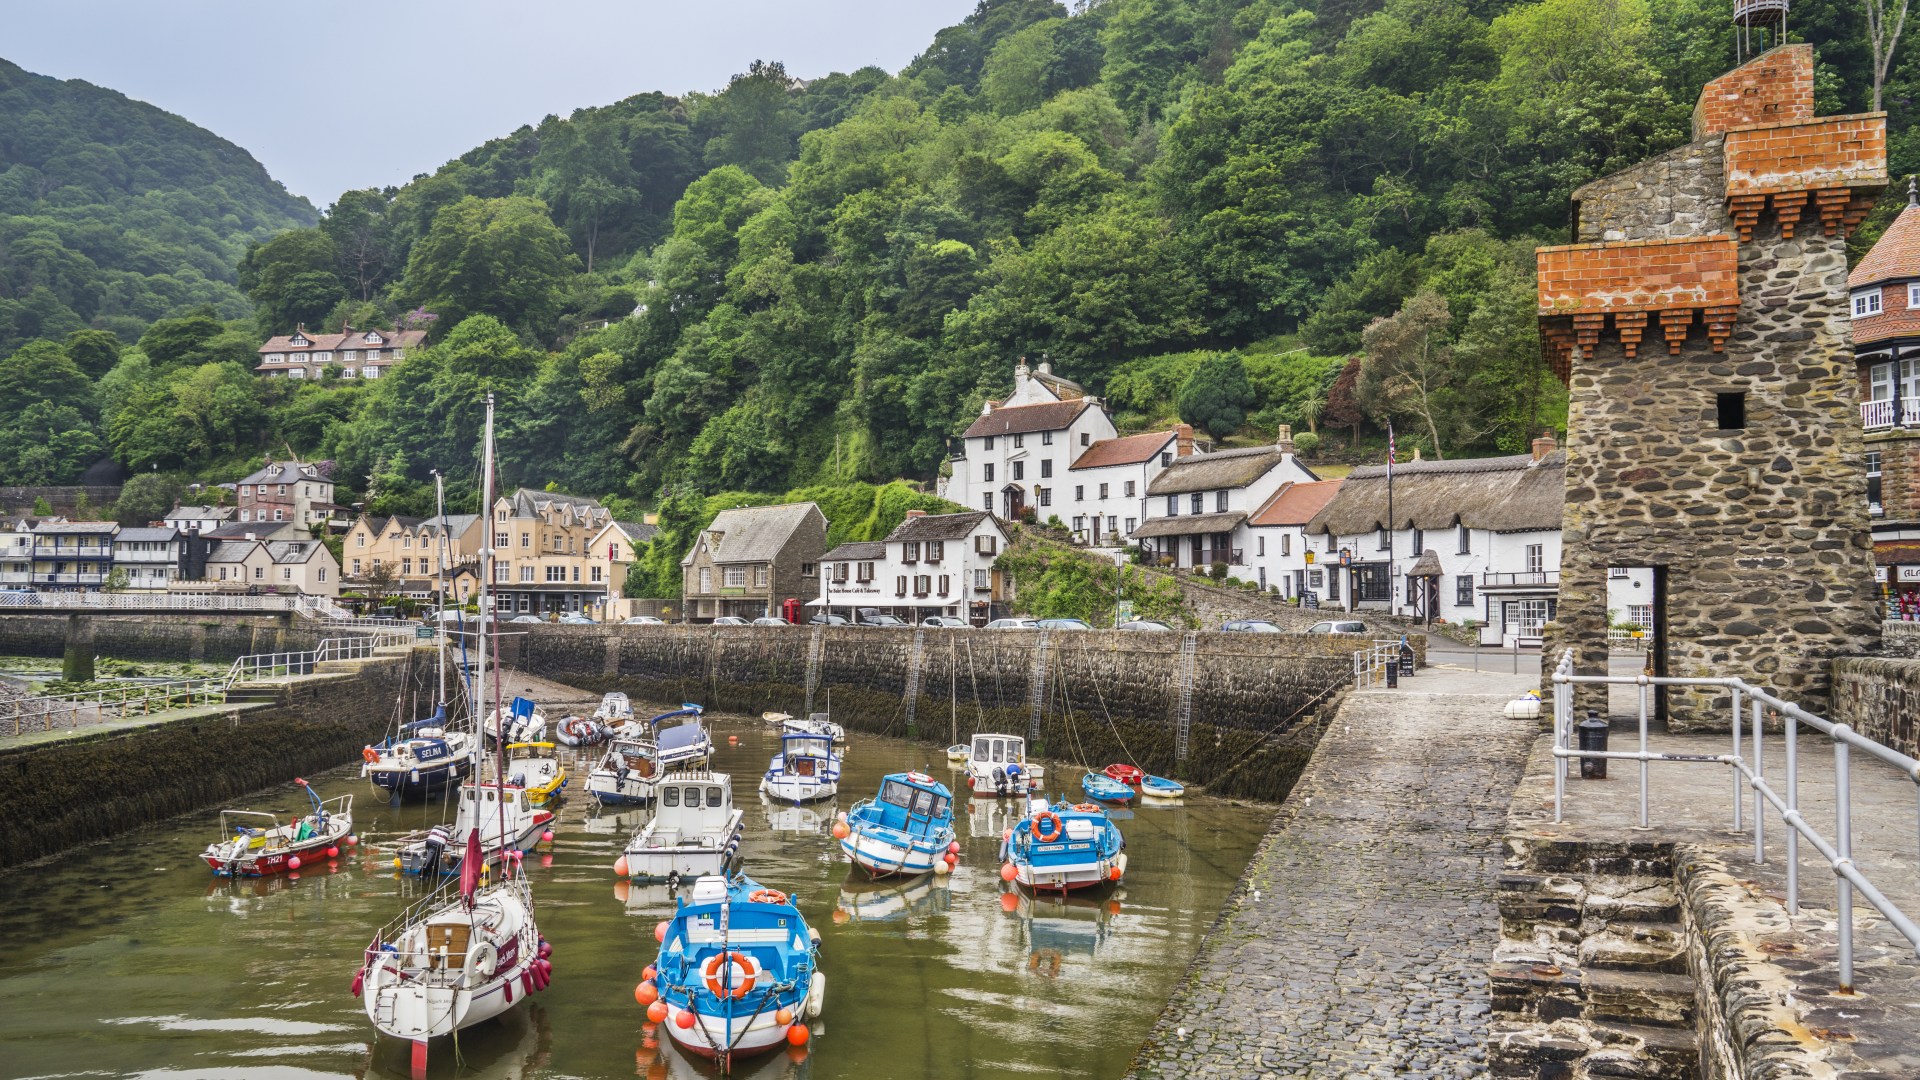 The charming English village with retro cobbled streets and the world